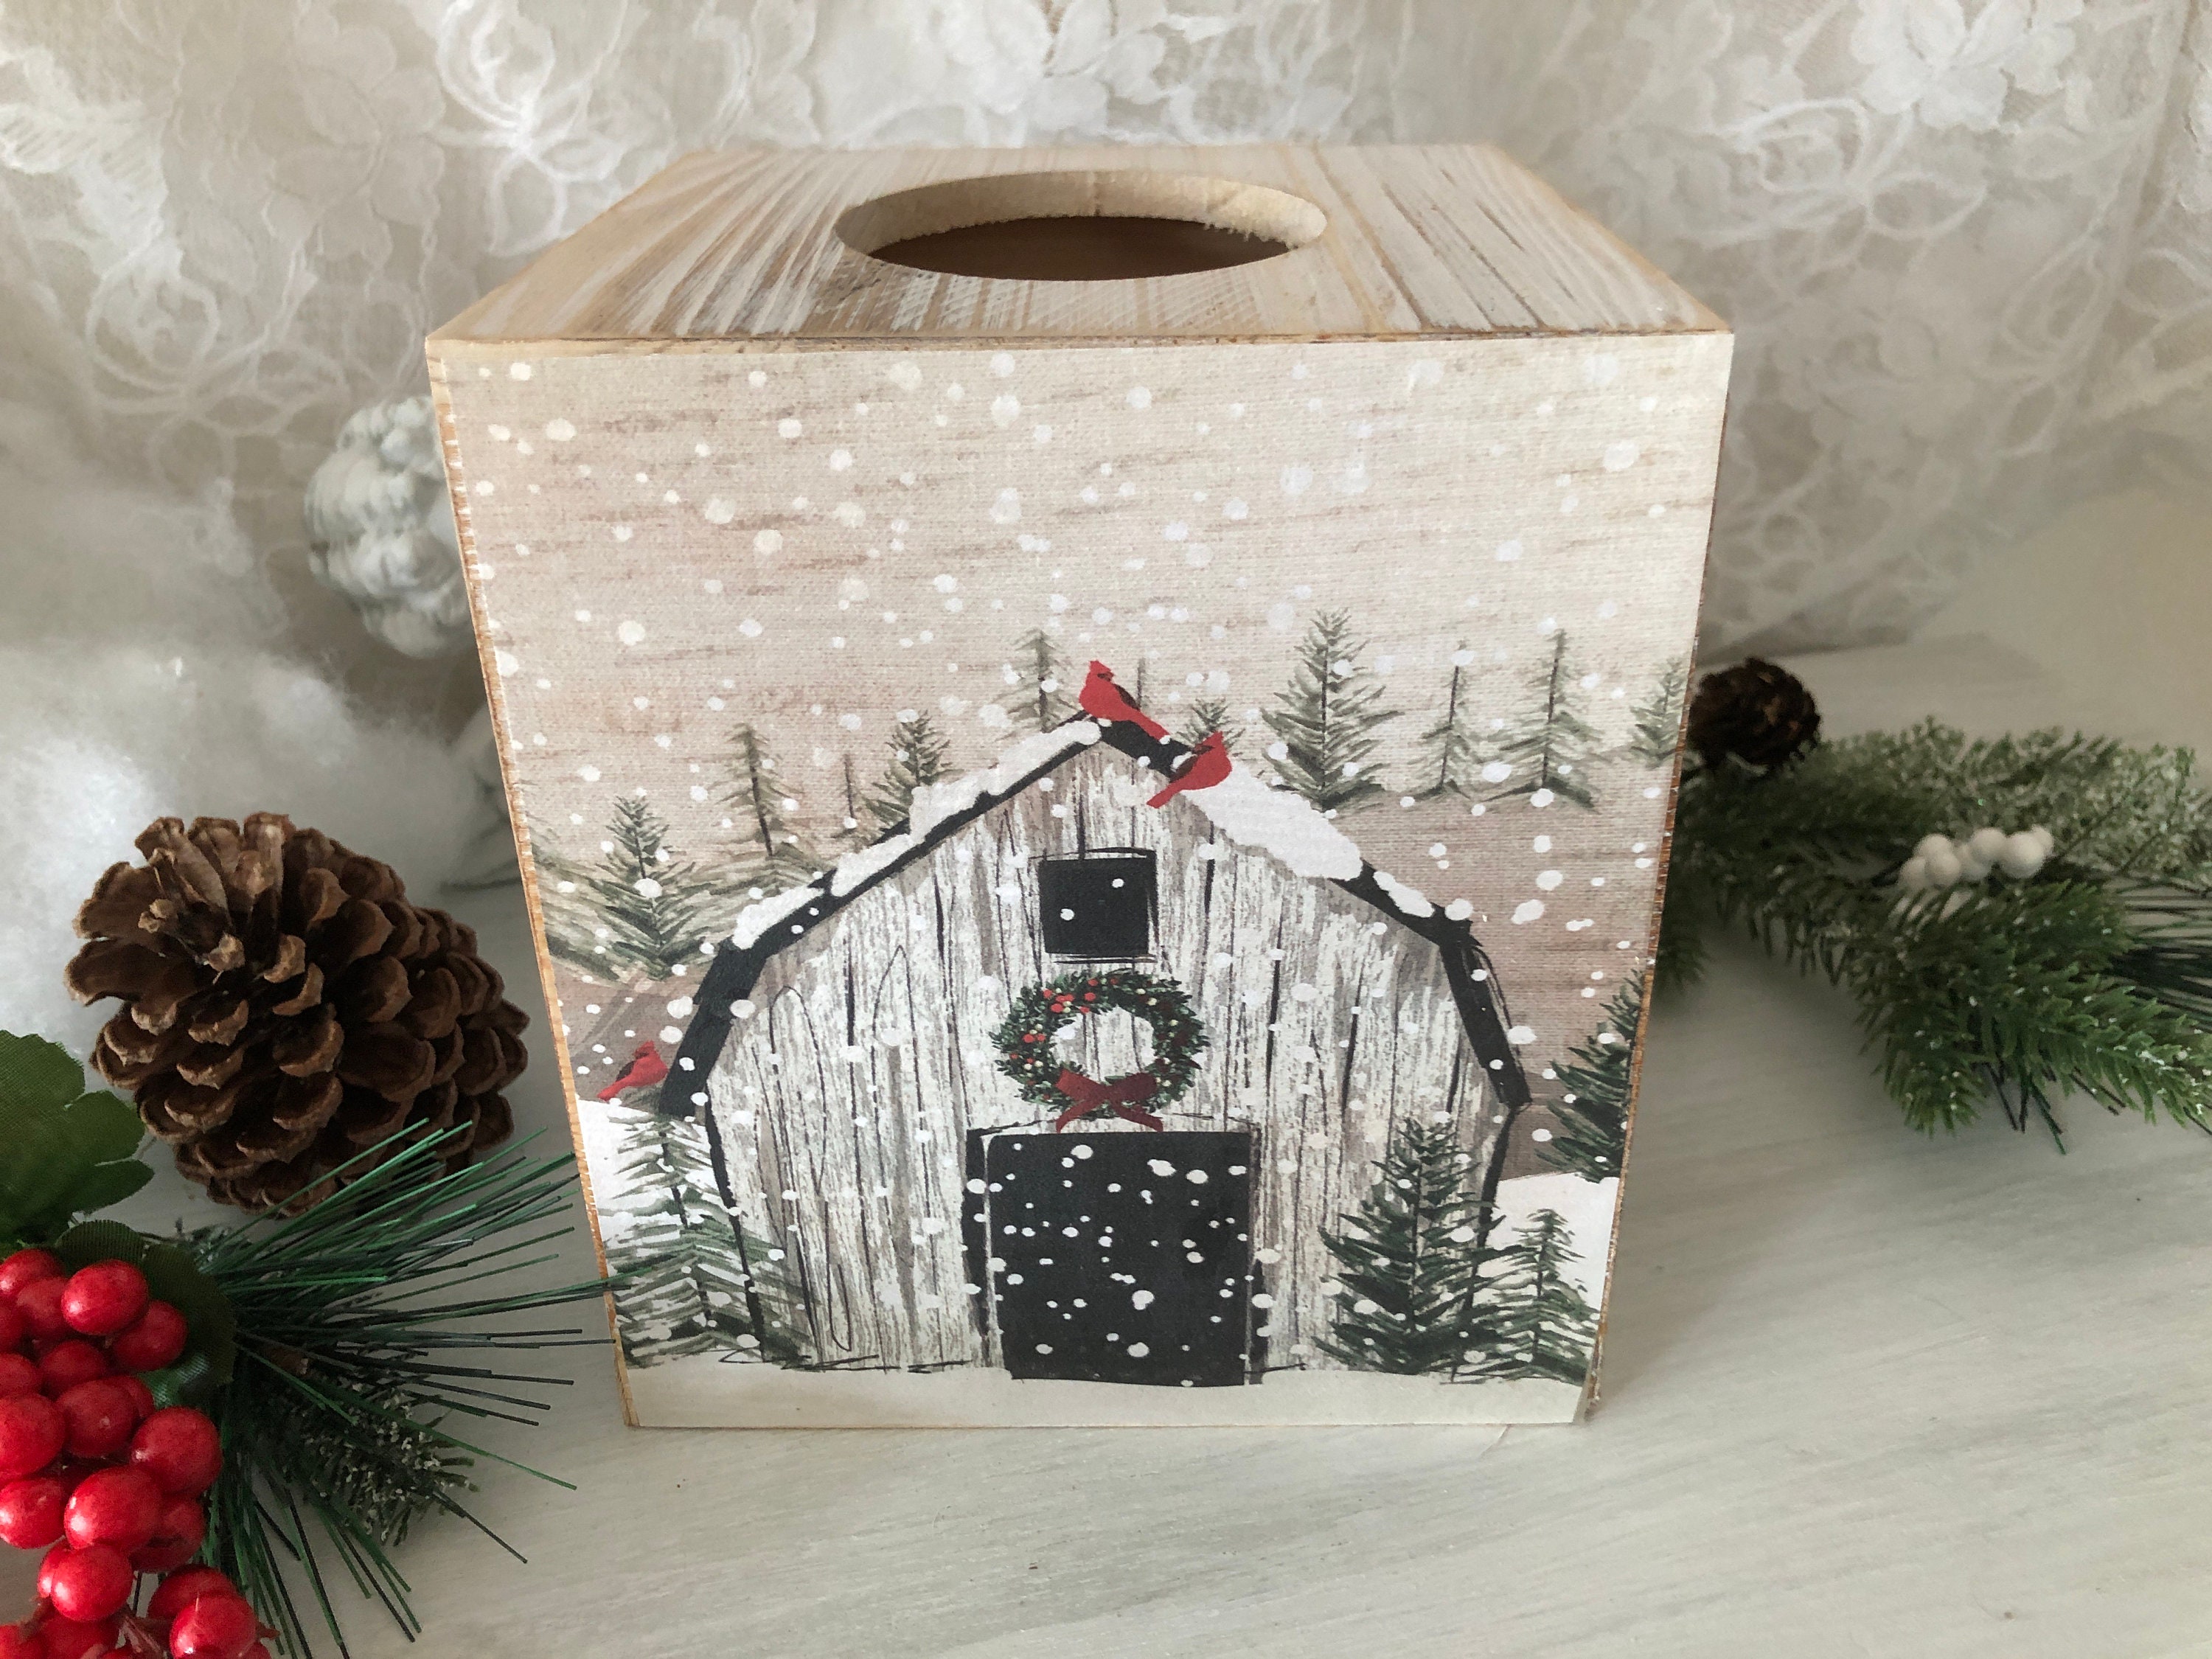 Christmas Design Printed Tissue - Box and Wrap